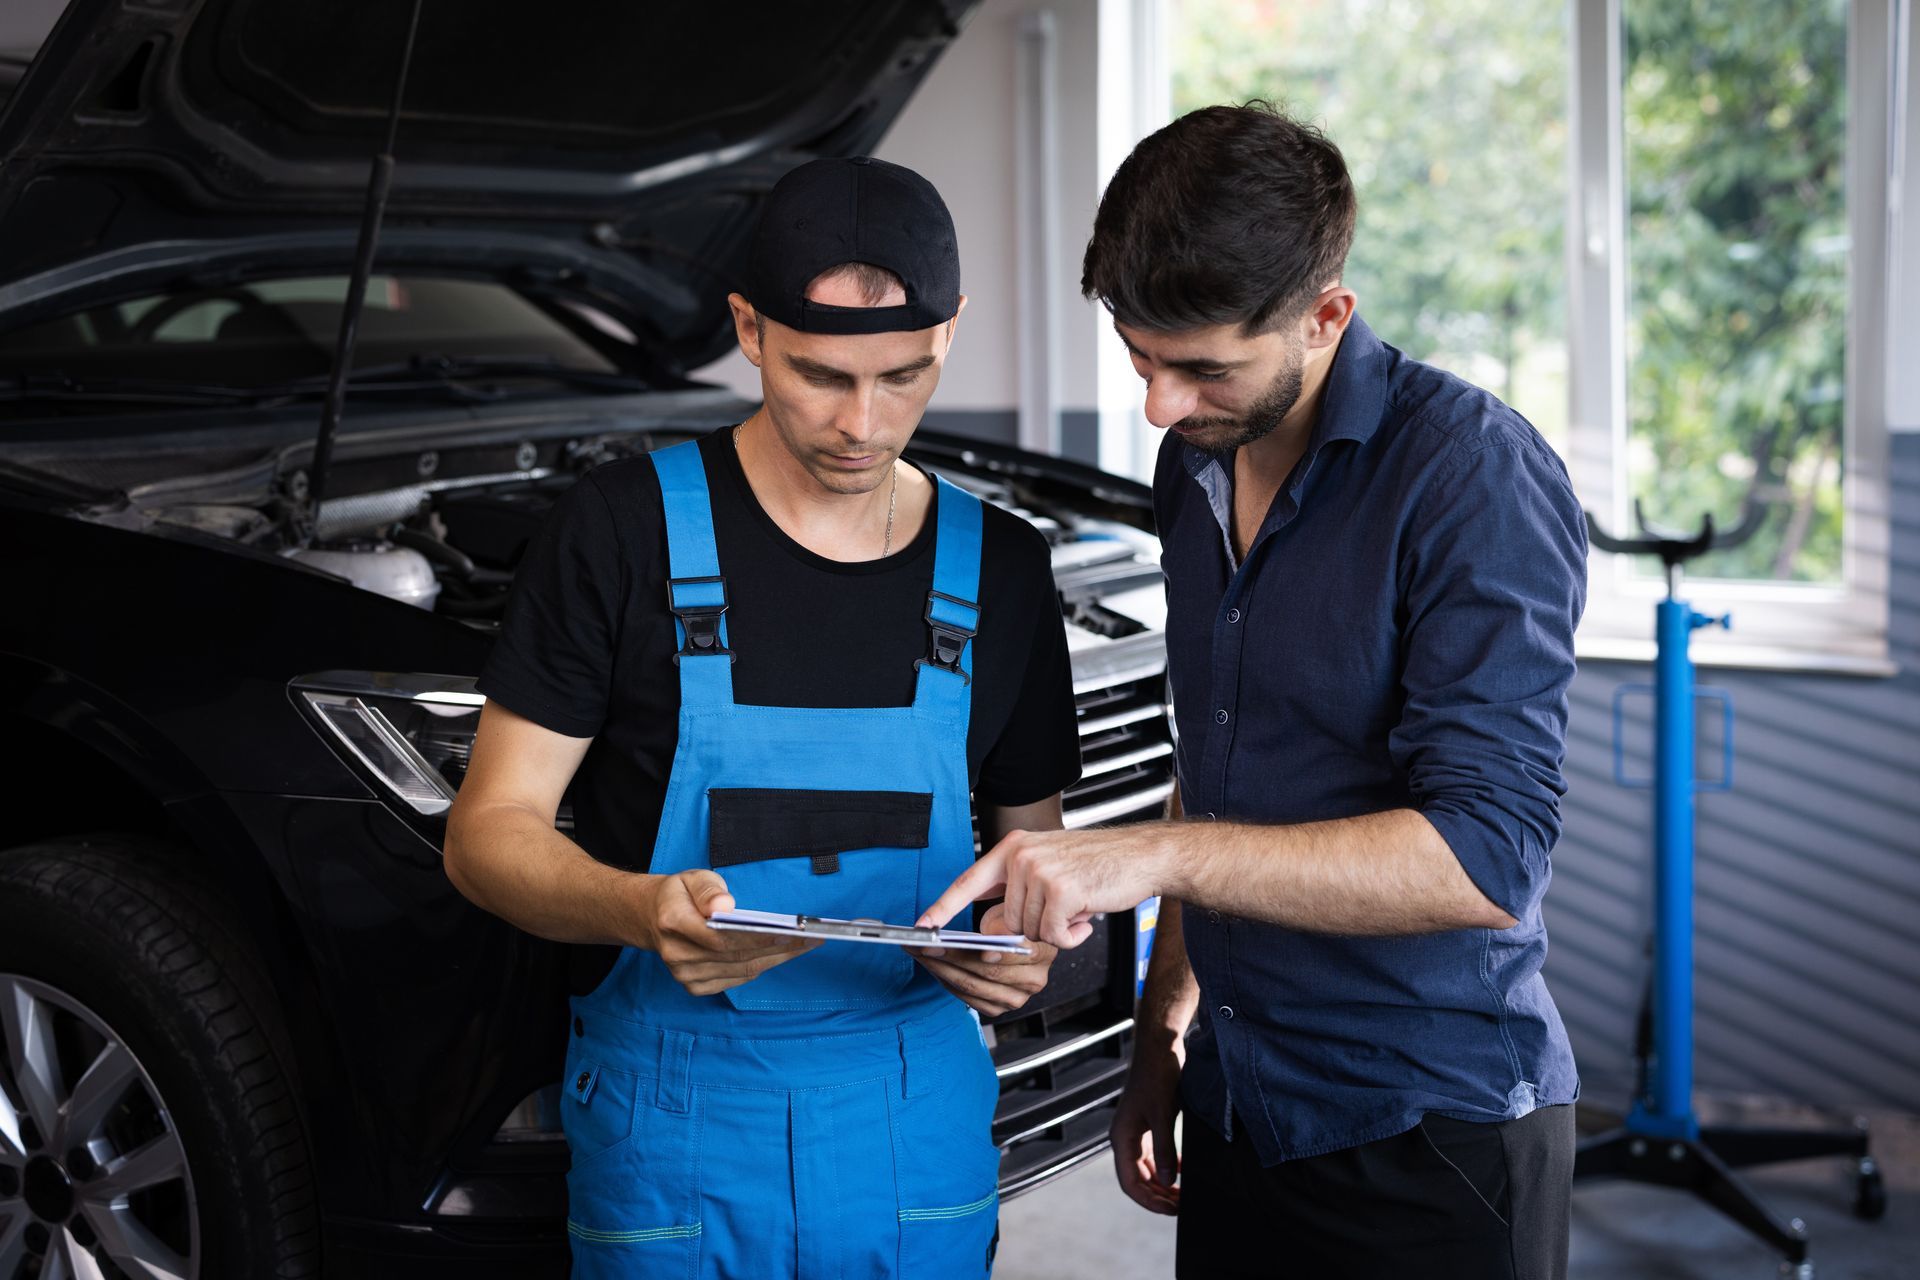 car service manager with a tablet talking to mechanic man discussing car diagnostics and repairing